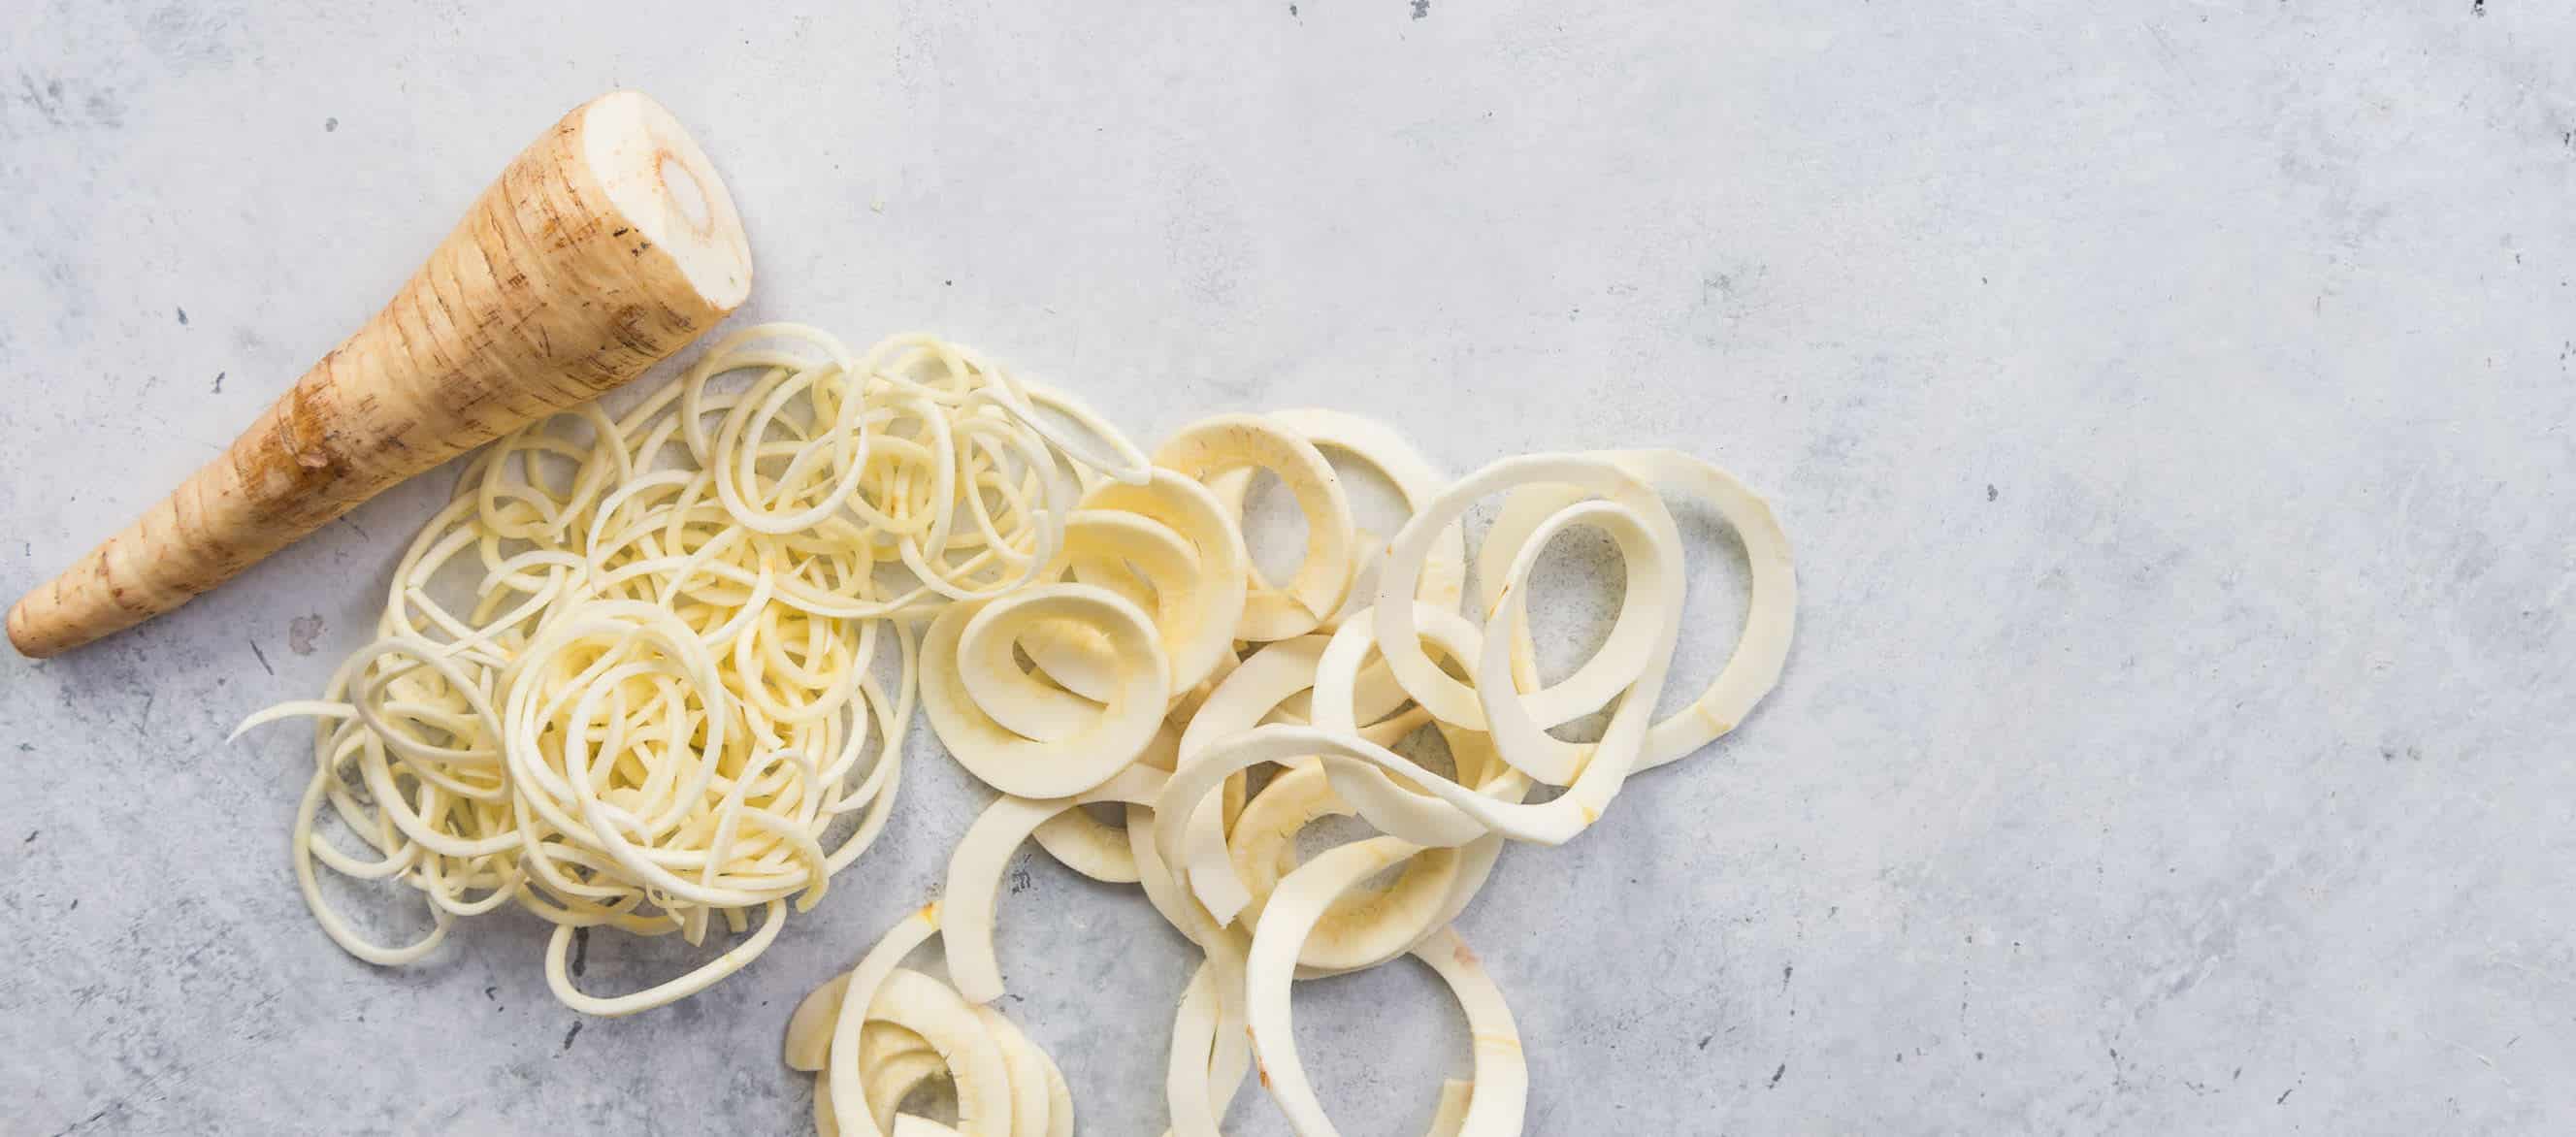 9 Reasons Why You Need A Spiralizer